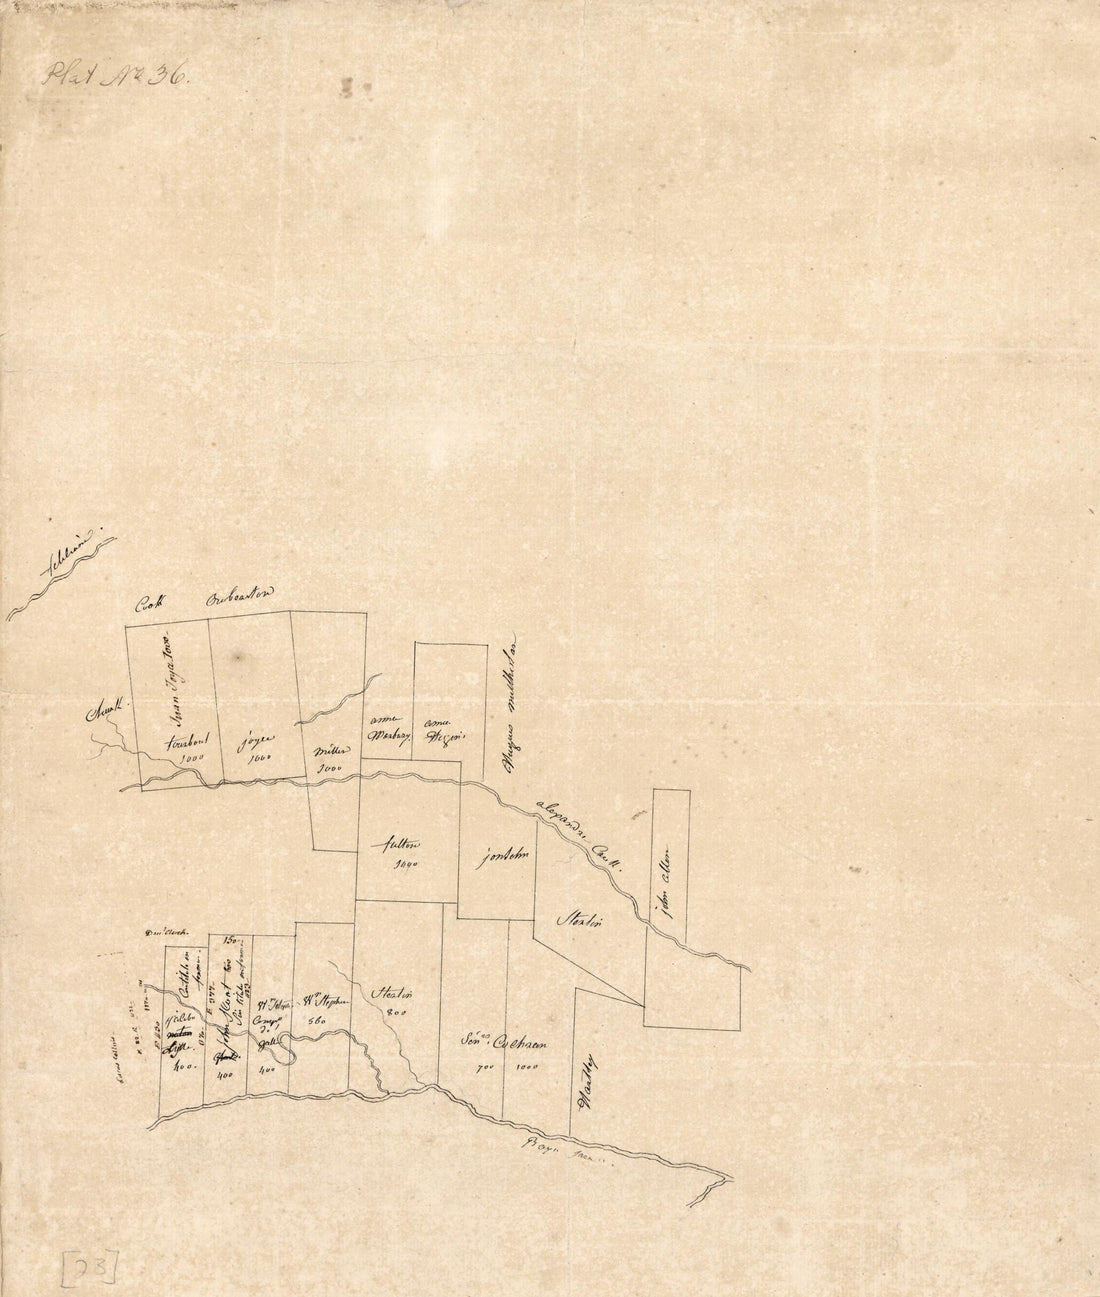 This old map of Map of a Portion of Feliciana District, Spanish West Florida, Along Alexander Creek and Bayou Tasa from 1805 was created by Vicente Sebastián Pintado in 1805